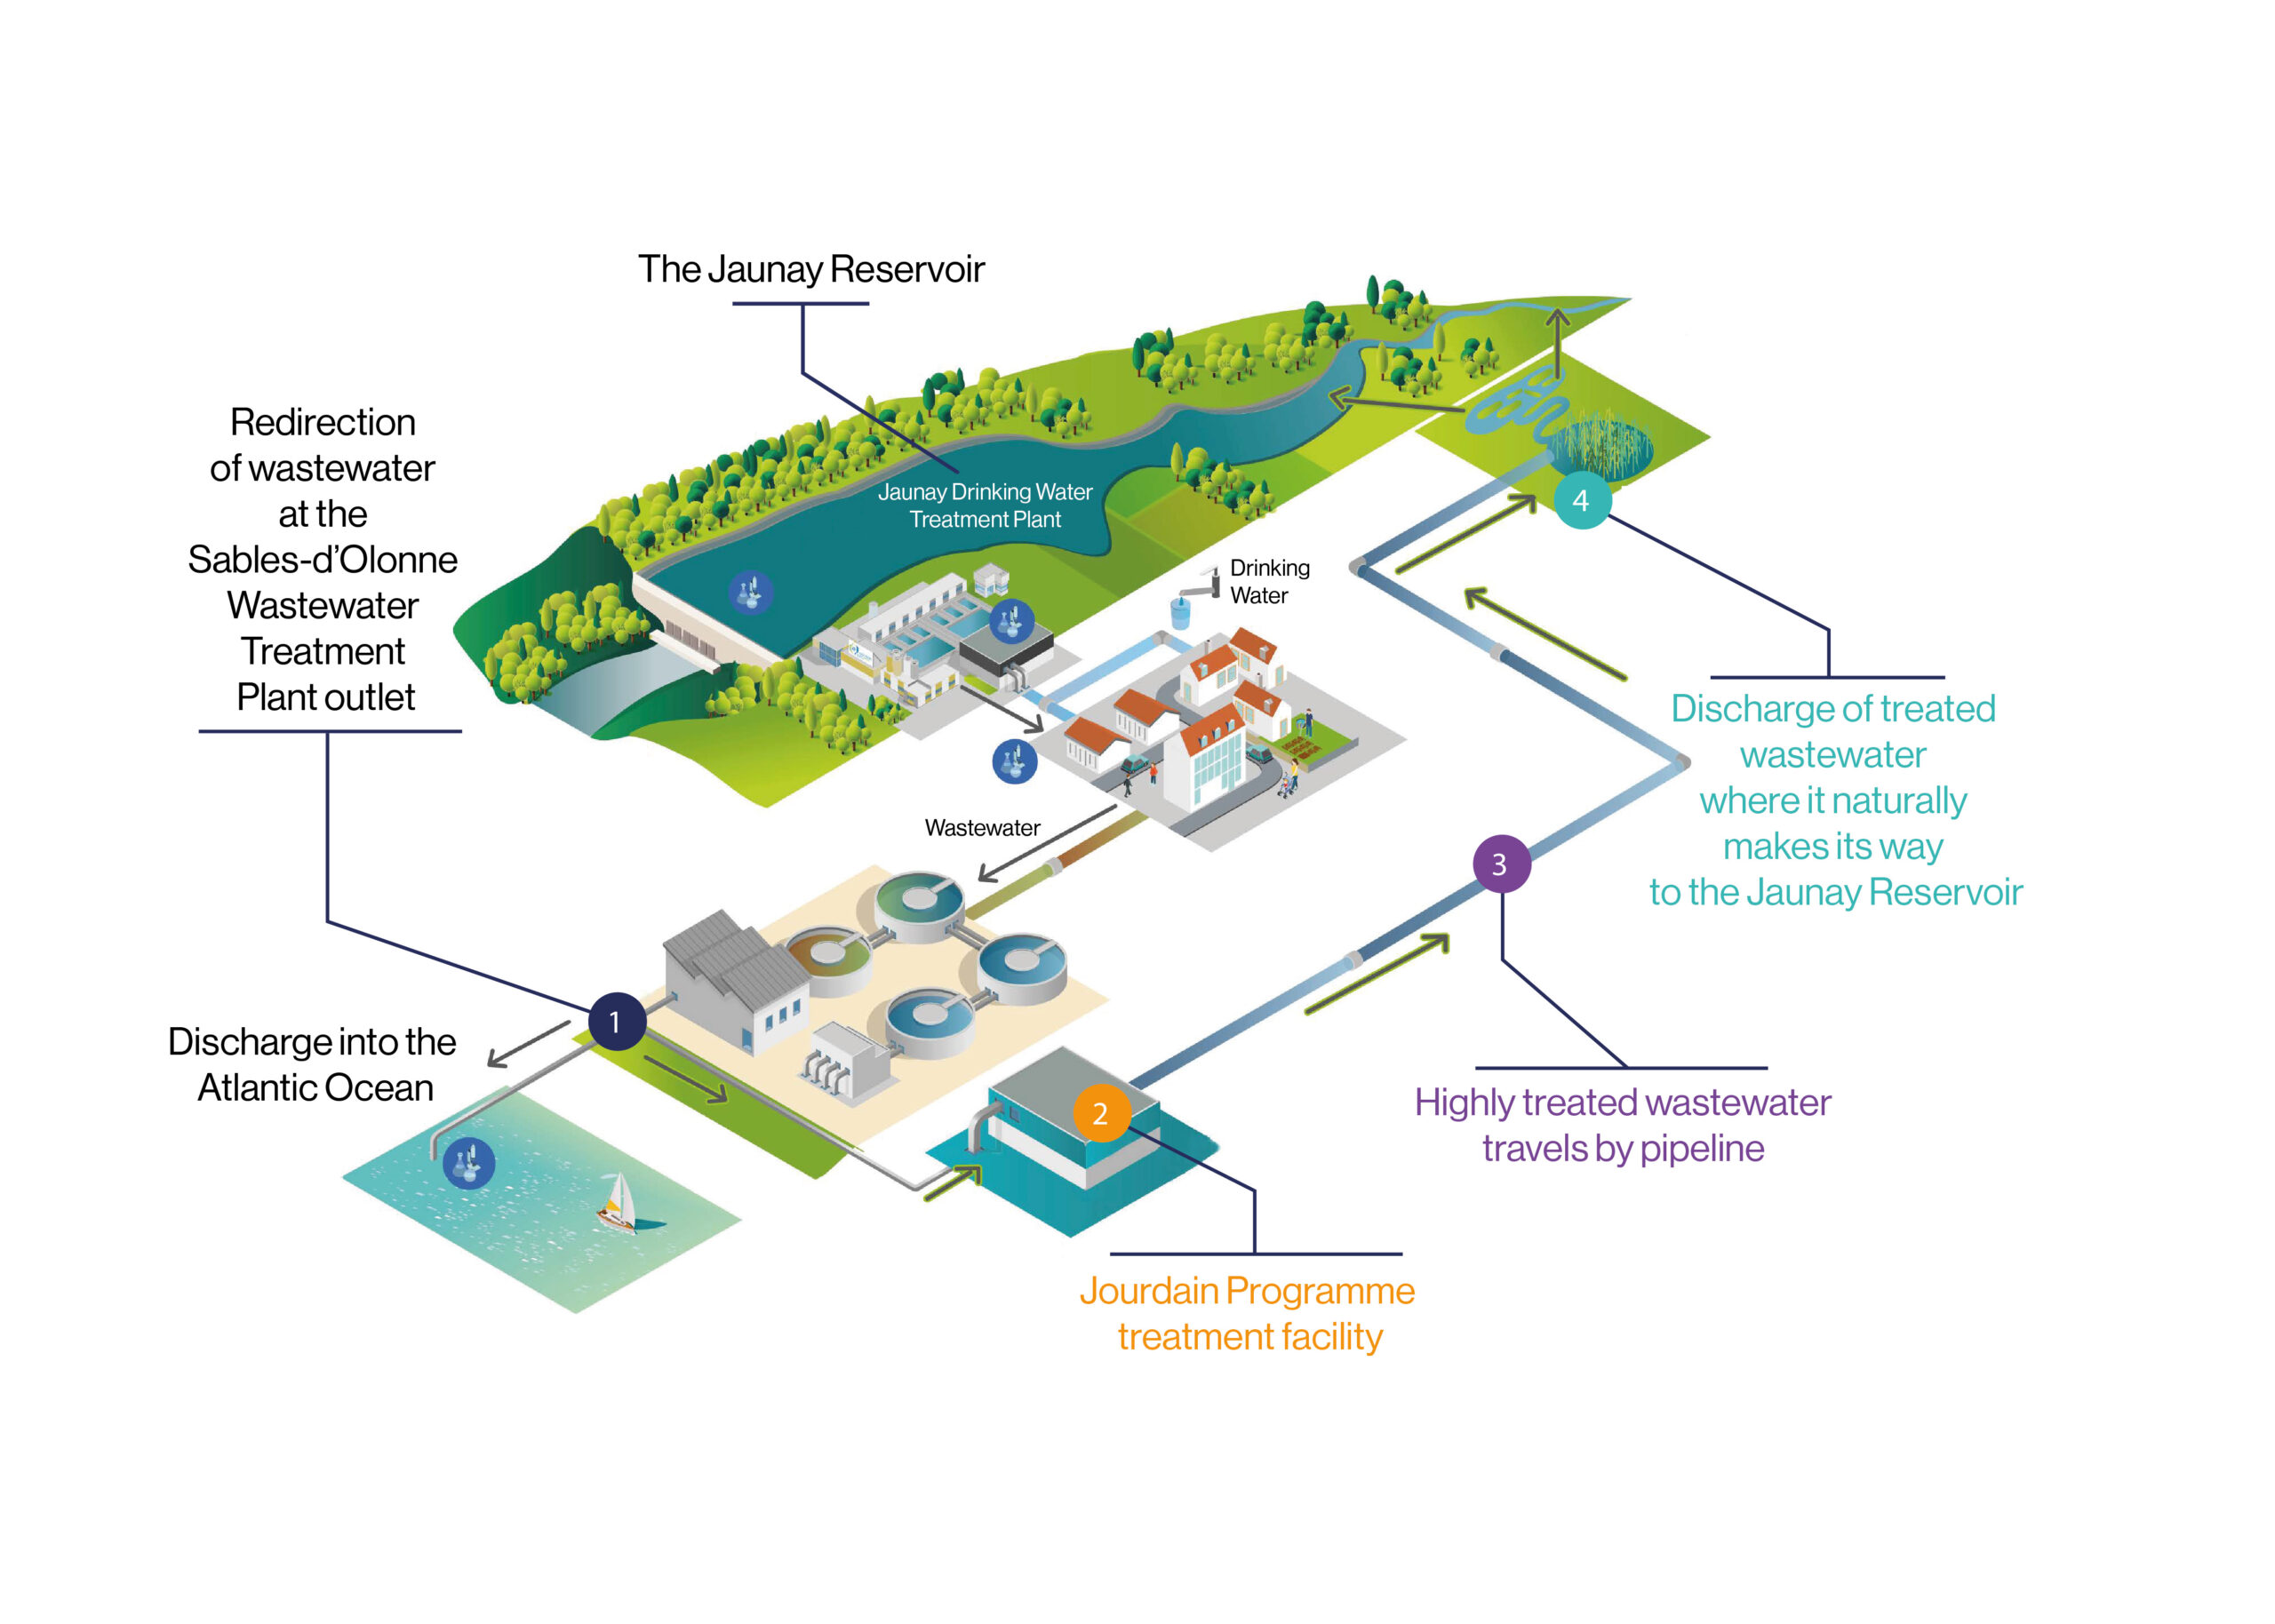 An overview of how wastewater will be treated and travel to the Jaunay Reservoir